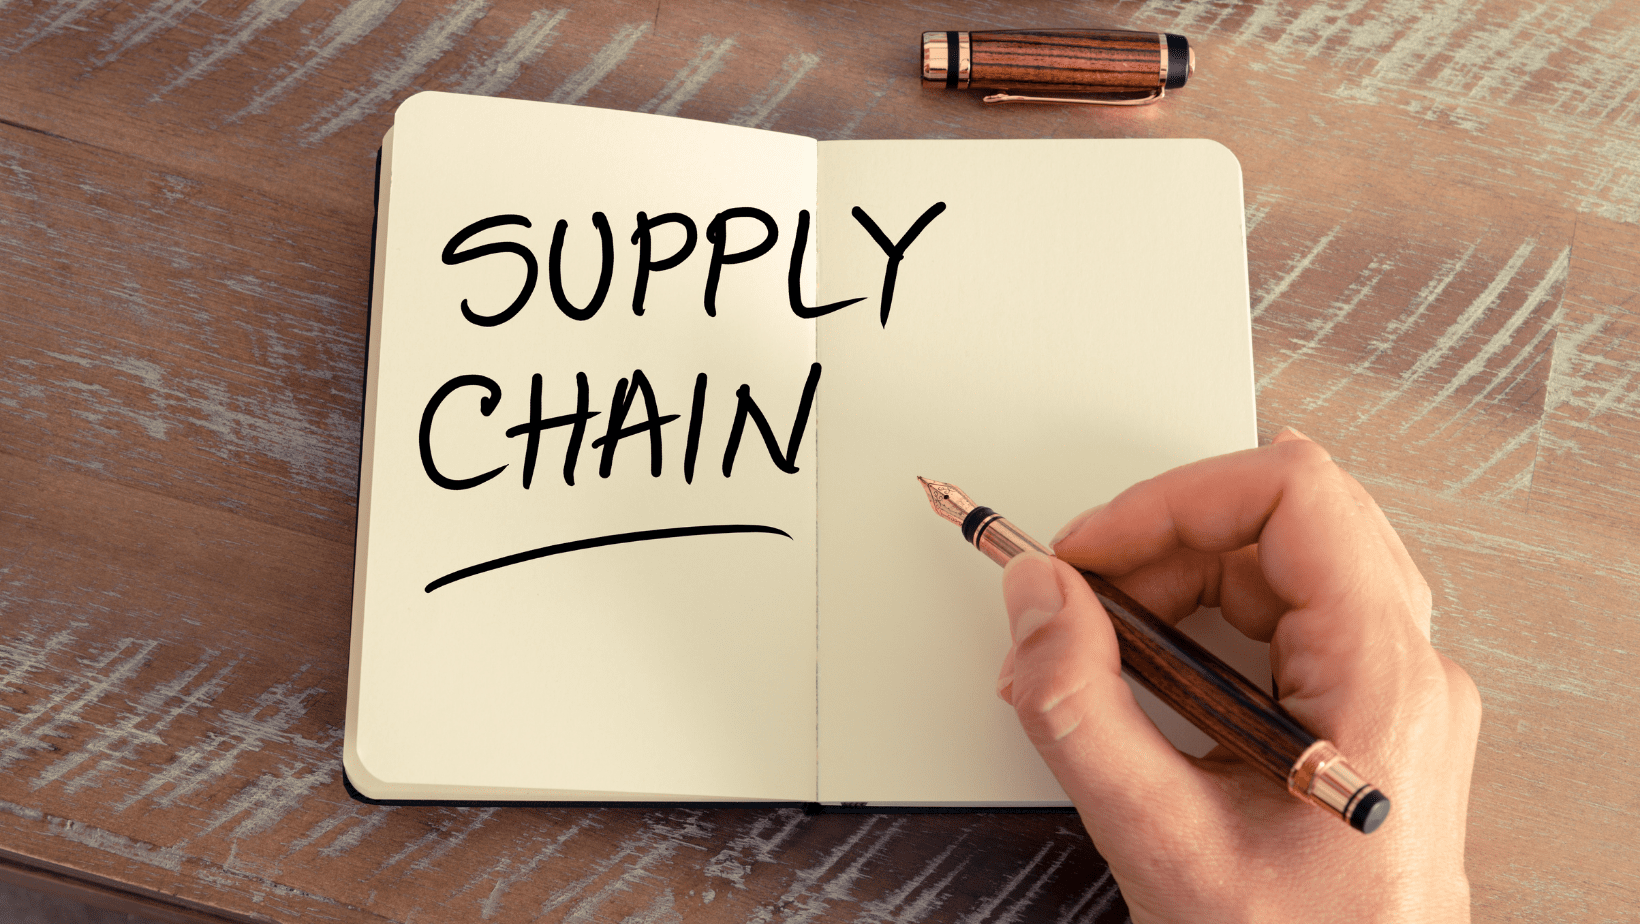 Solutions for the Supply Chain